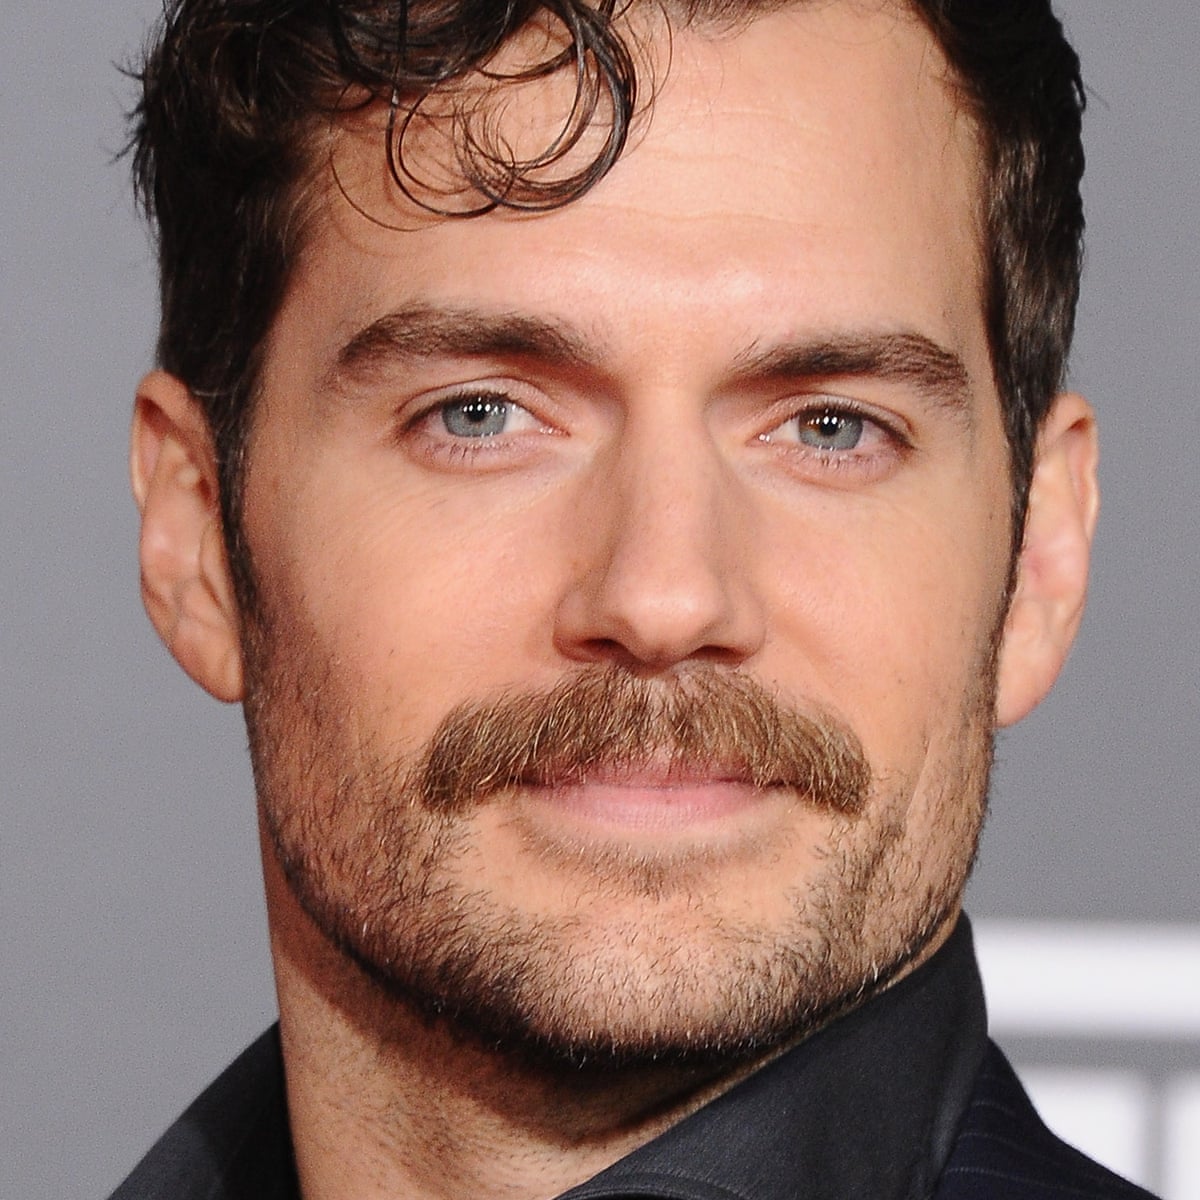 Henry Cavill criticised for #MeToo comments | Movies | The Guardian